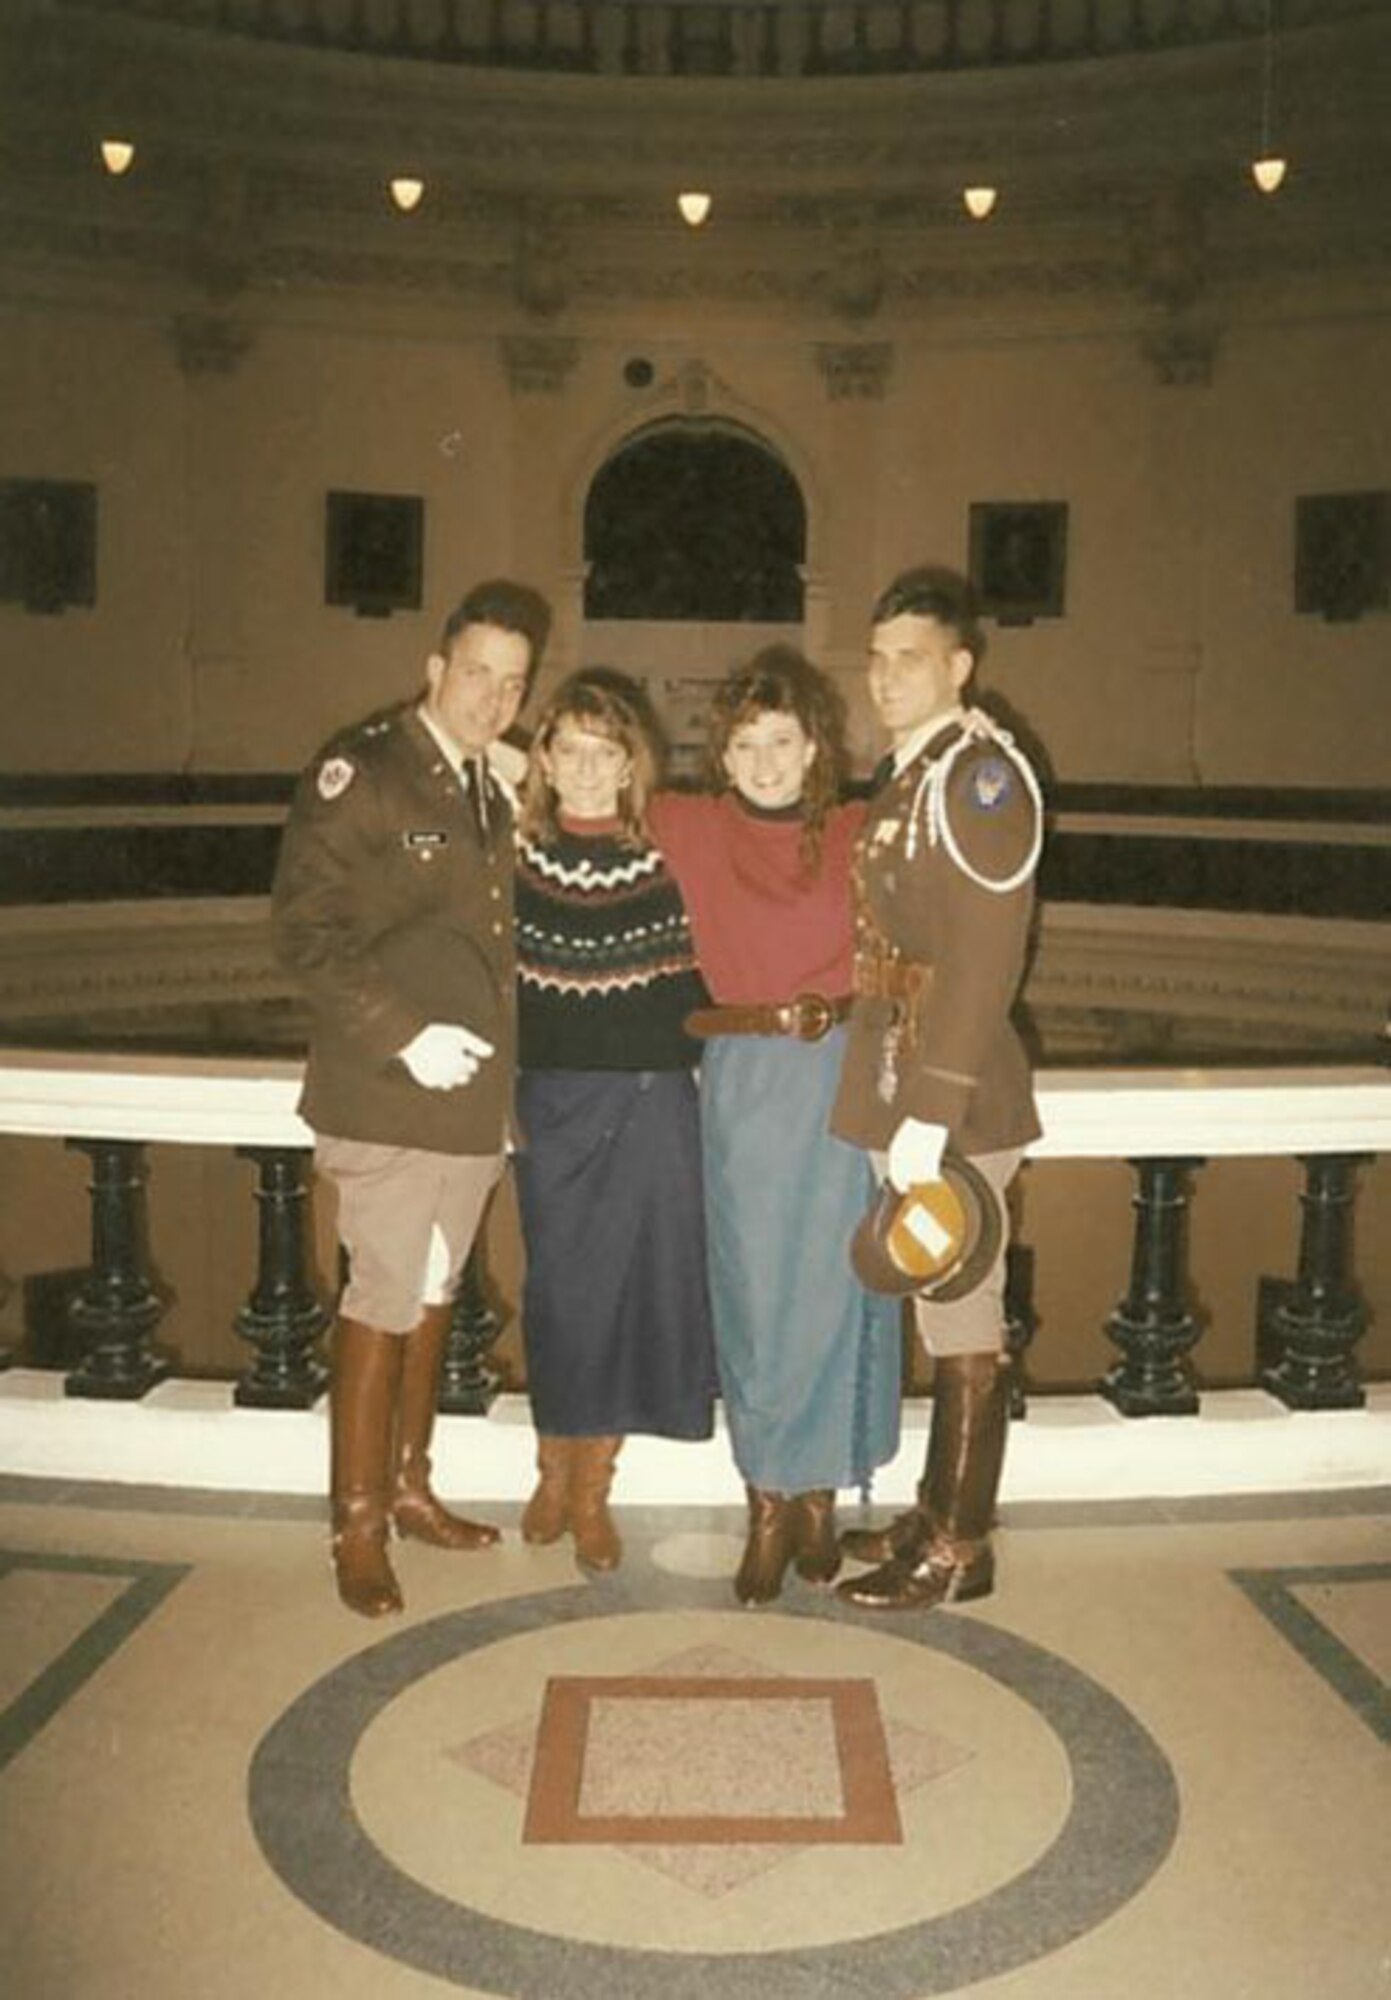 Texas A&M University cadets Douglas Thies, far right, and David Vaclavik, far left stand for a picture in their uniforms with their future wives after a Texas A&M football game in Austin, Texas, circa 1992. As best friends, the two would become commissioned Air Force officers and eventually command groups at Shaw Air Force Base, S.C., at the same time. (Courtesy photo)